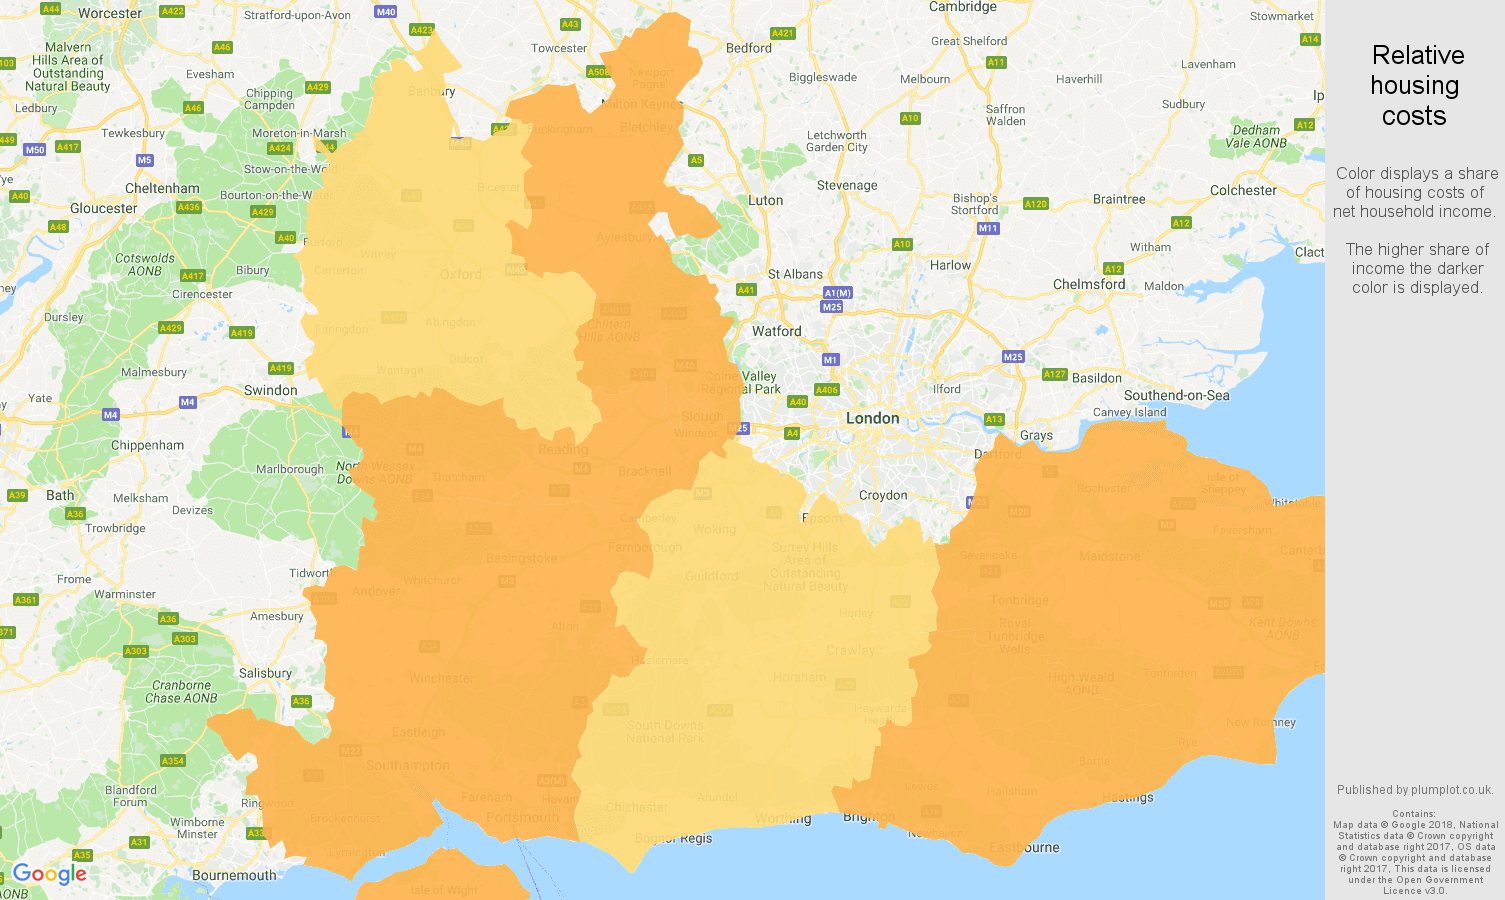 South East relative housing costs map